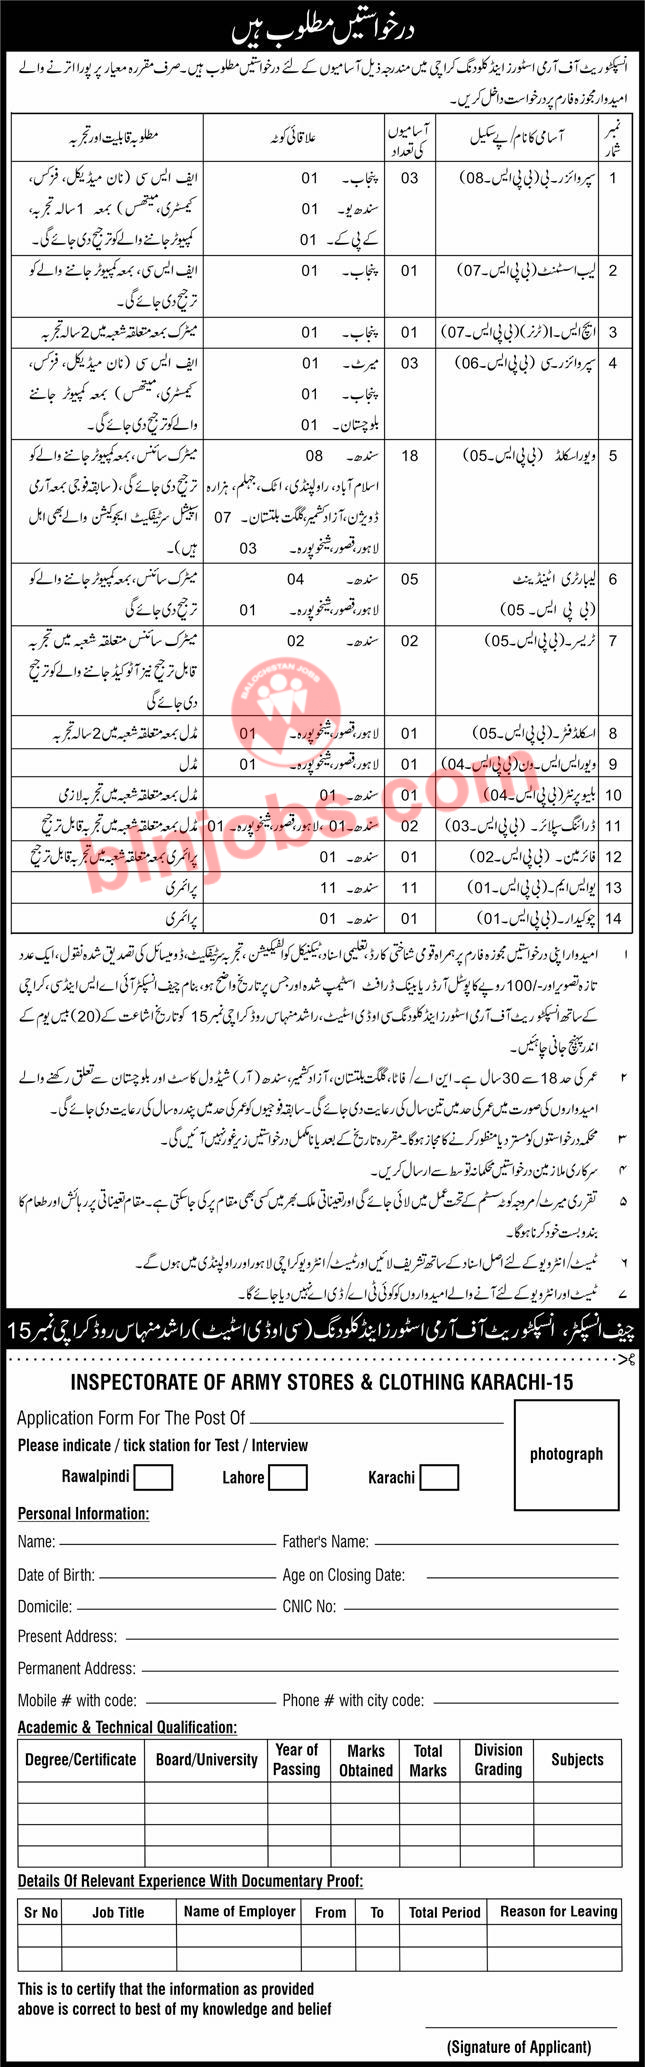 Inspectorate of Army Stores and Clothing Karachi Jobs Form